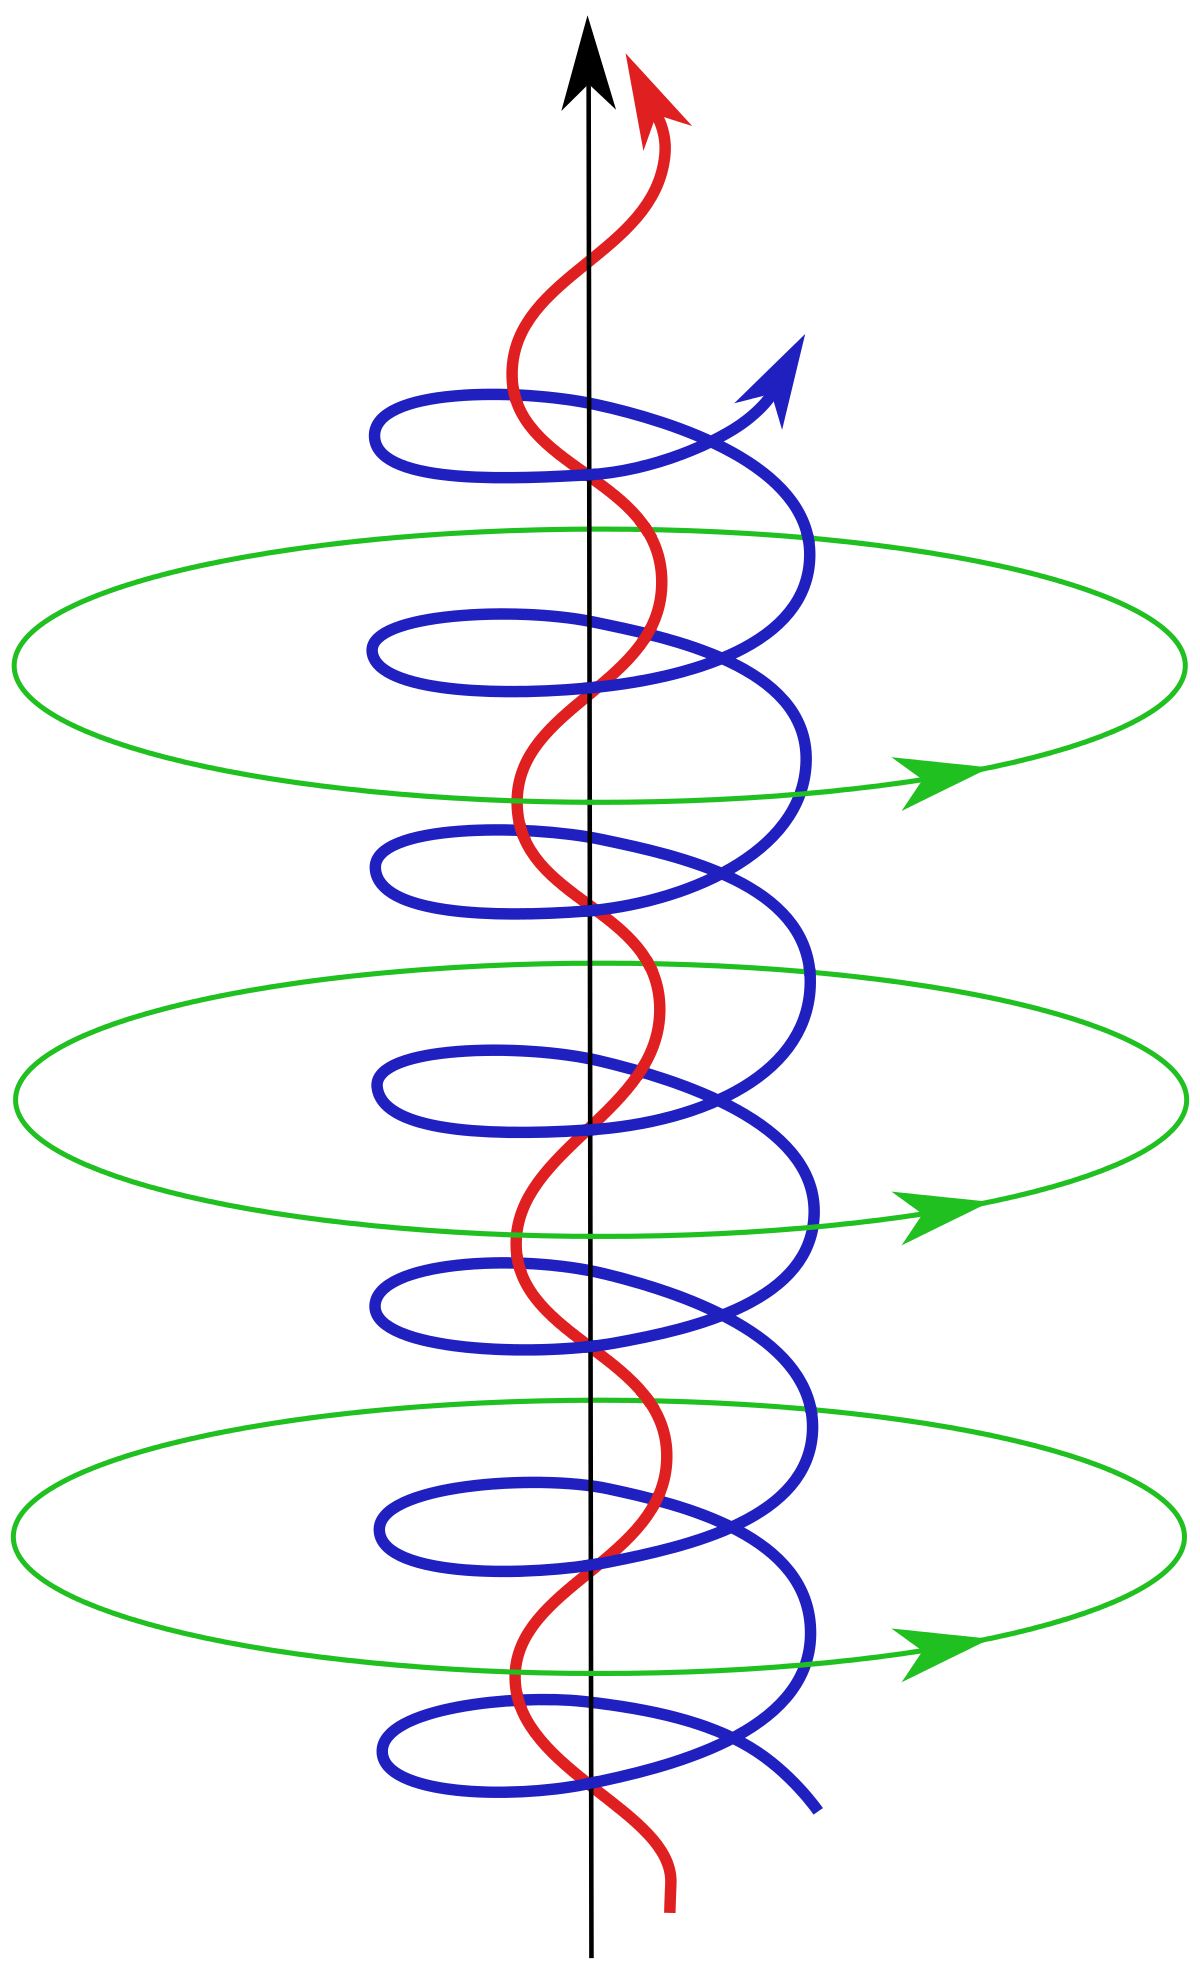 https://upload.wikimedia.org/wikipedia/commons/thumb/1/12/Magnetic_rope.svg/1200px-Magnetic_rope.svg.png